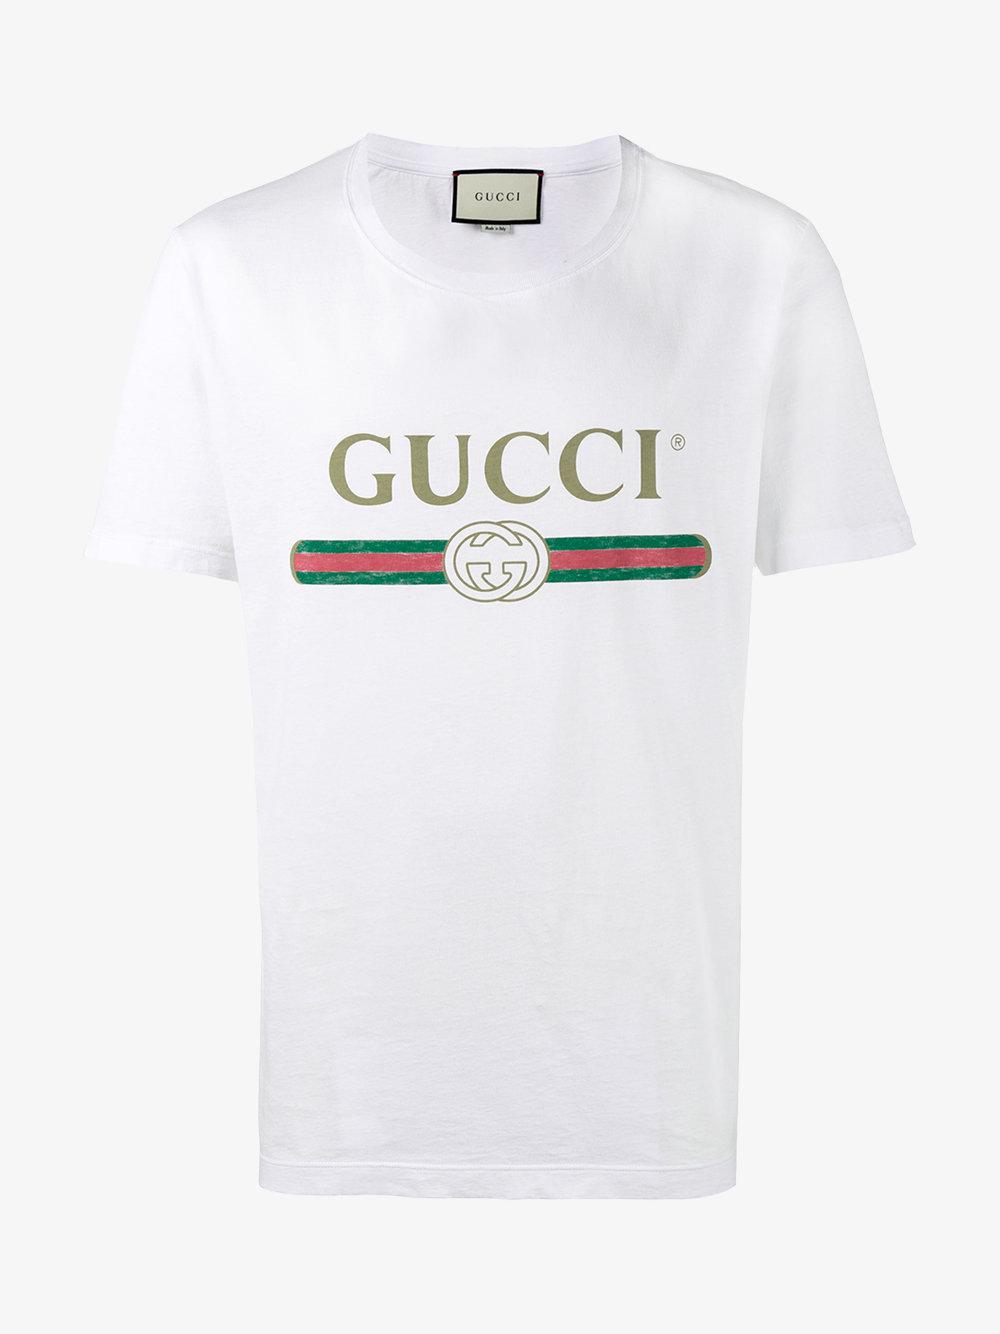 Gucci Cotton Fake Logo T-shirt in White for Men - Lyst